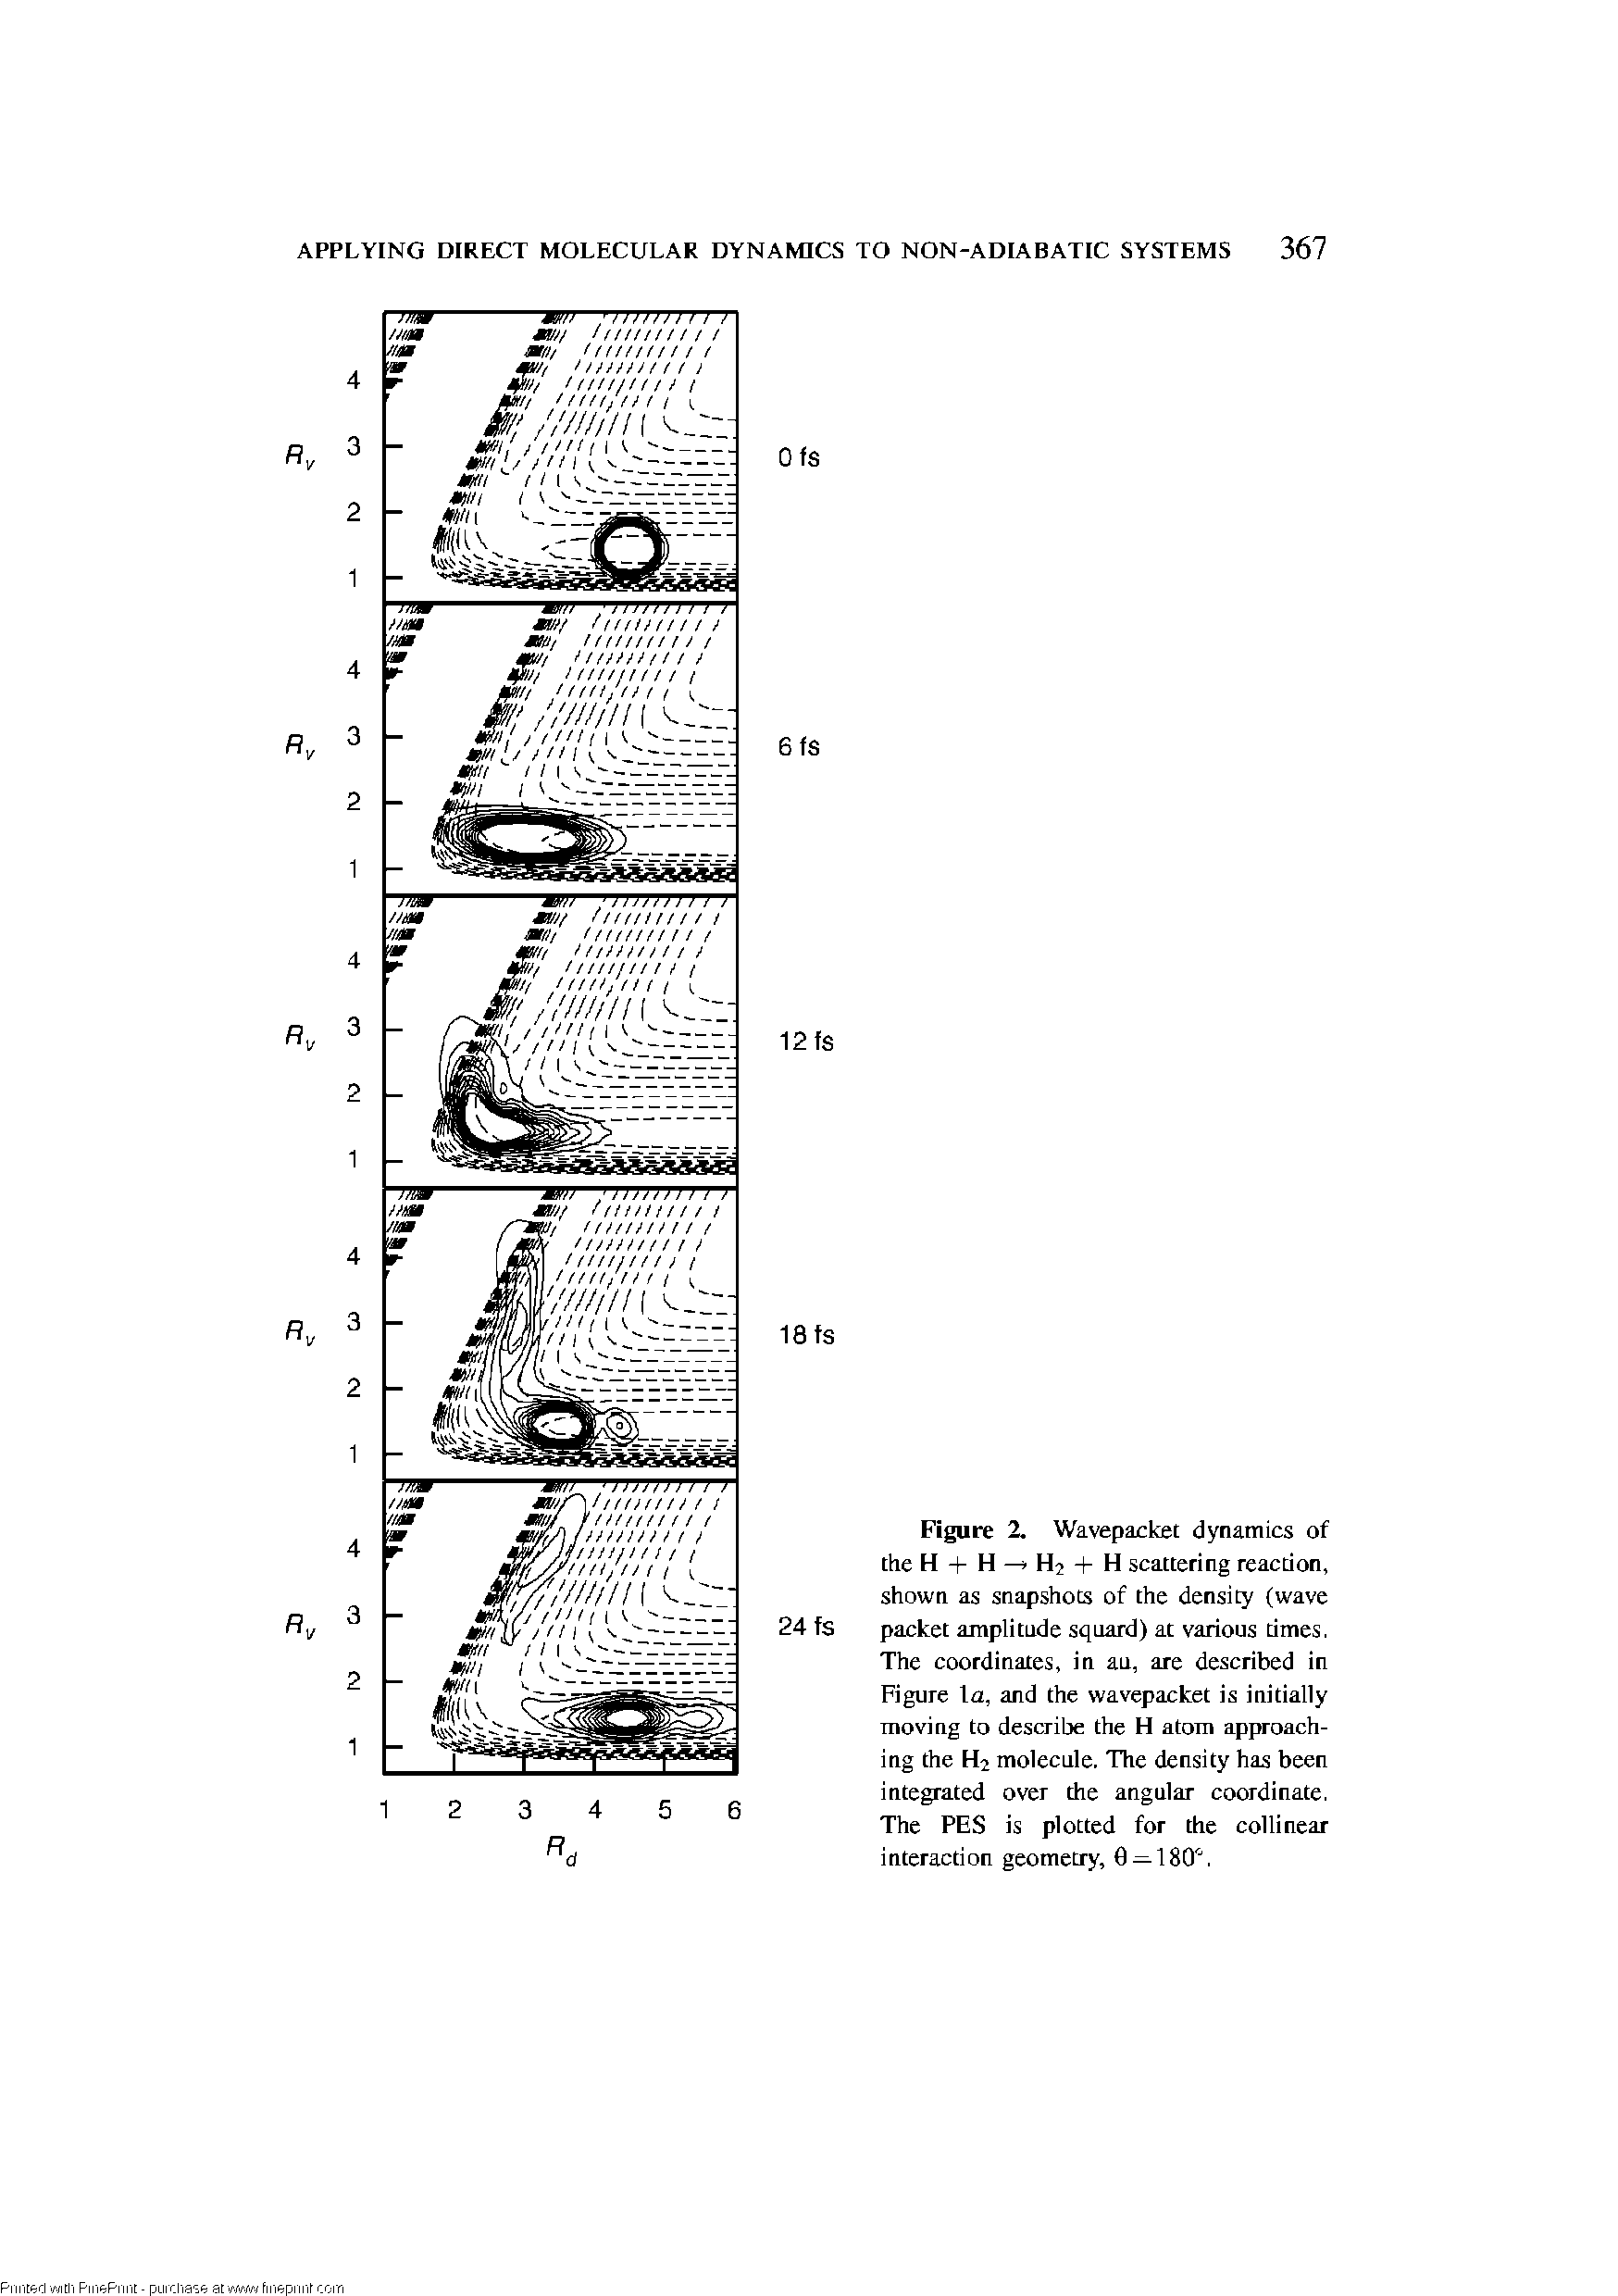 Figure 2. Wavepacket dynamics of the H + H H2 + H scattering reaction, shown as snapshots of the density (wave packet amplitude squard) at various times, The coordinates, in au, are described in Figure la, and the wavepacket is initially moving to describe the H atom approaching the H2 molecule. The density has been integrated over the angular coordinate, The PES is plotted for the collinear interaction geometry, 0 180, ...